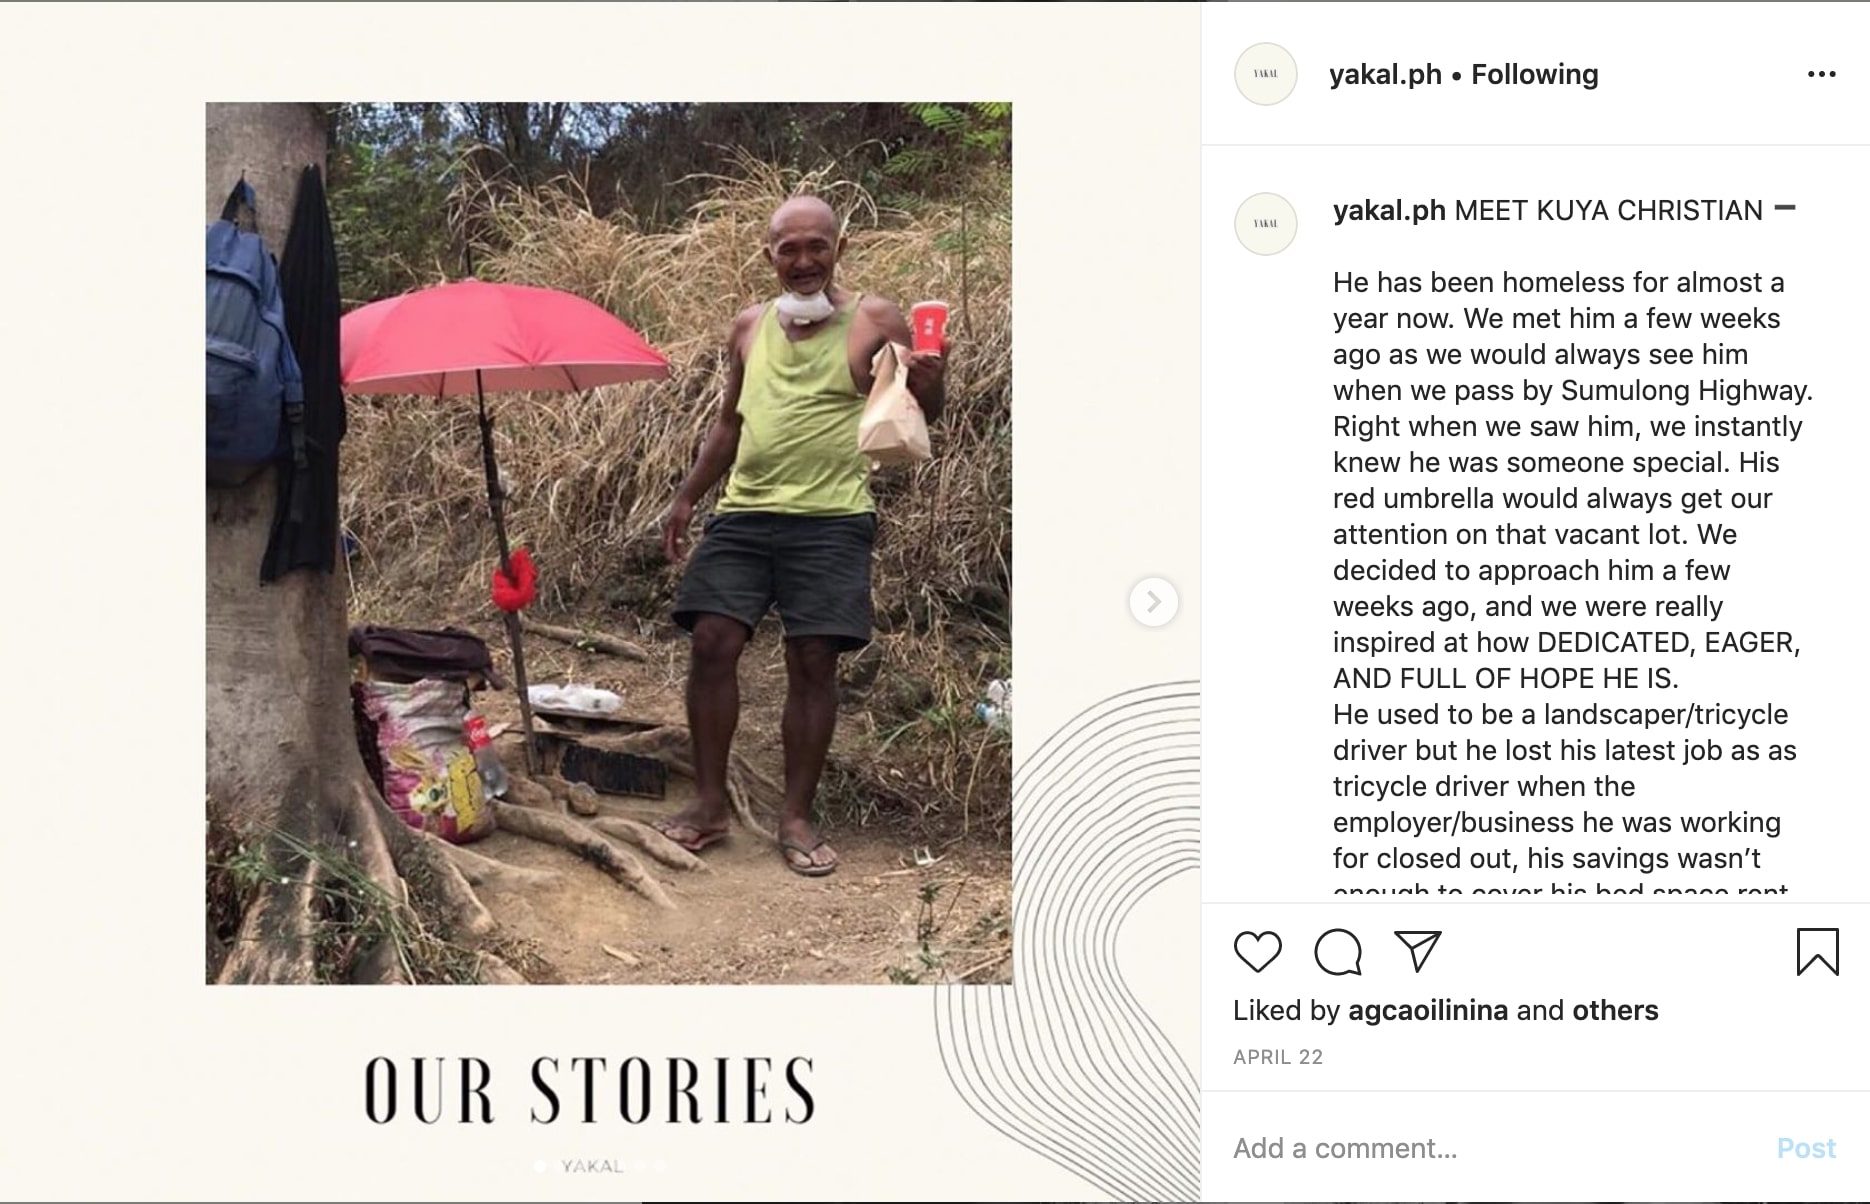 KUYA CHRISTIAN. Yakal makes the effort to tell the stories of the homeless people it aims to sustainably help. Screenshot from Yakal.ph Instagram page